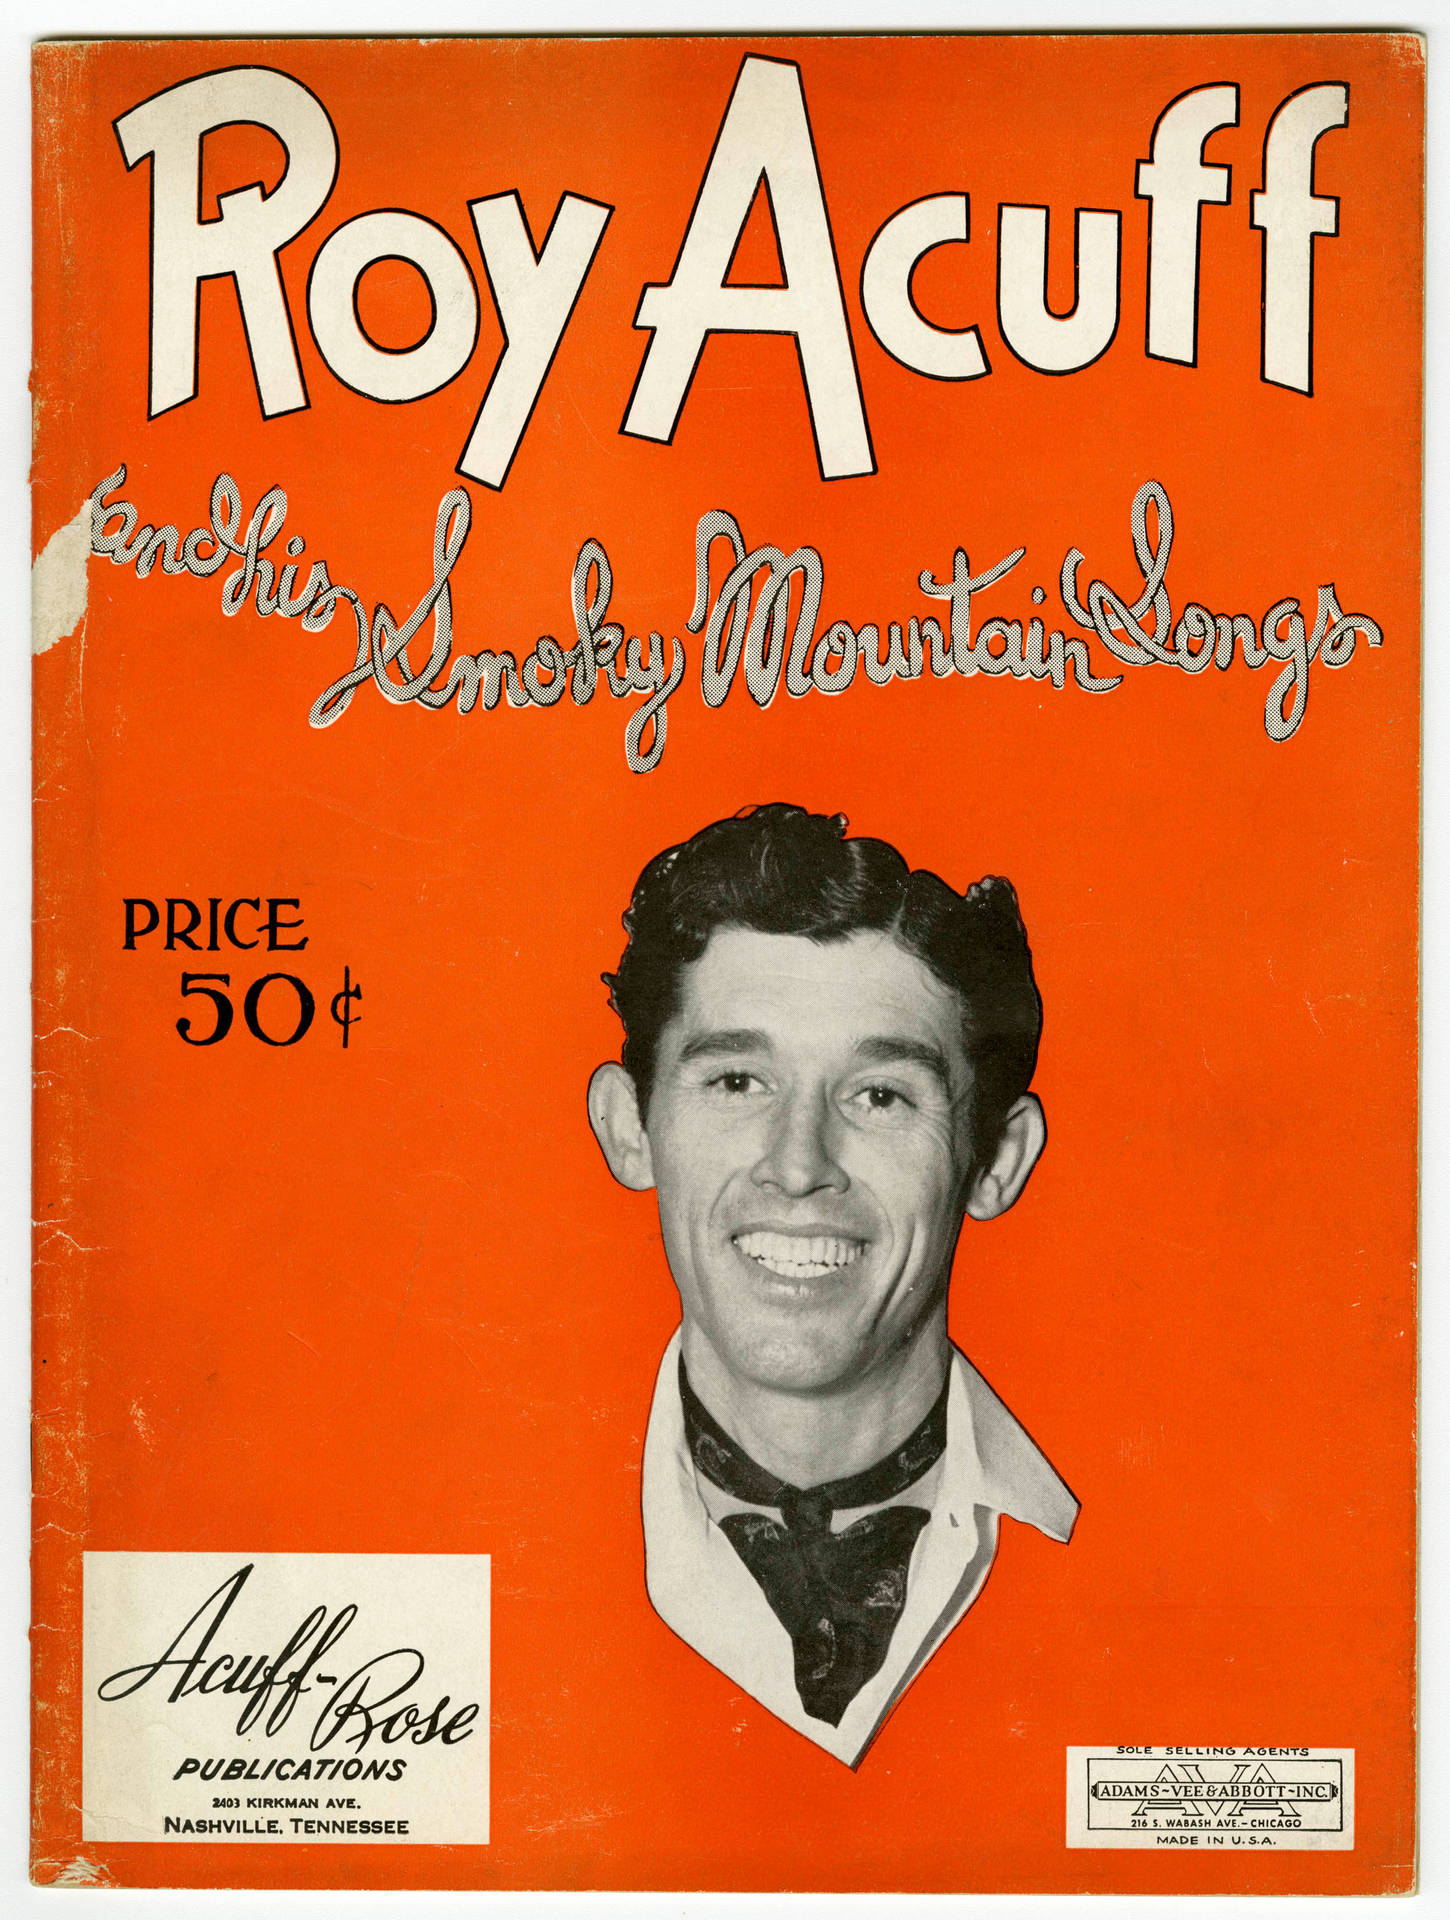 Roy Acuff&His Smoky Mountain Songs Wallpaper